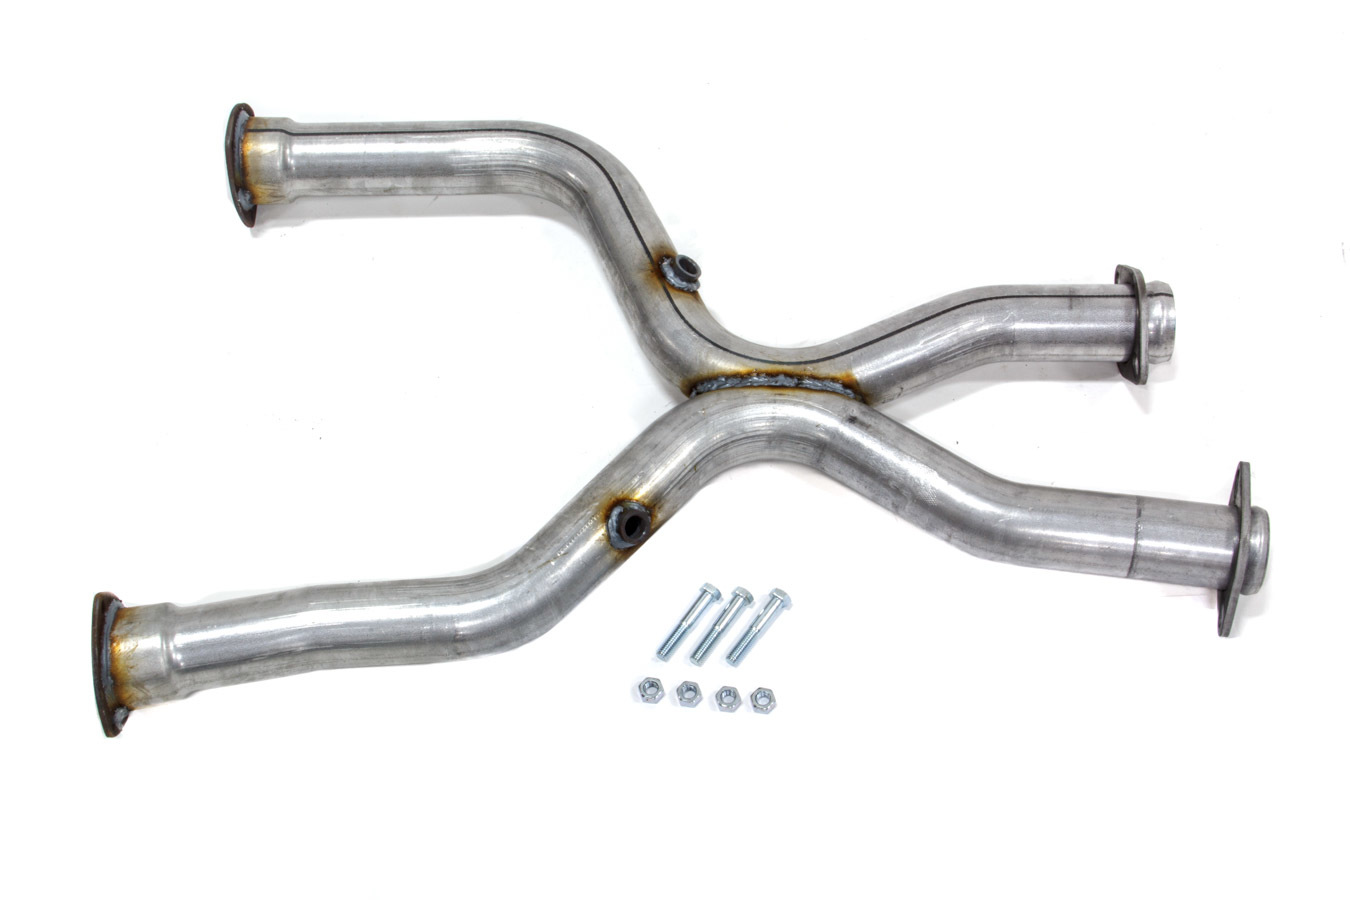 Flowtech Exhaust X-Pipe, 2-1/2" Dia. Requires Flowtech Headers, Hardware Included, Steel, Aluminized, Ford Modular, Mus